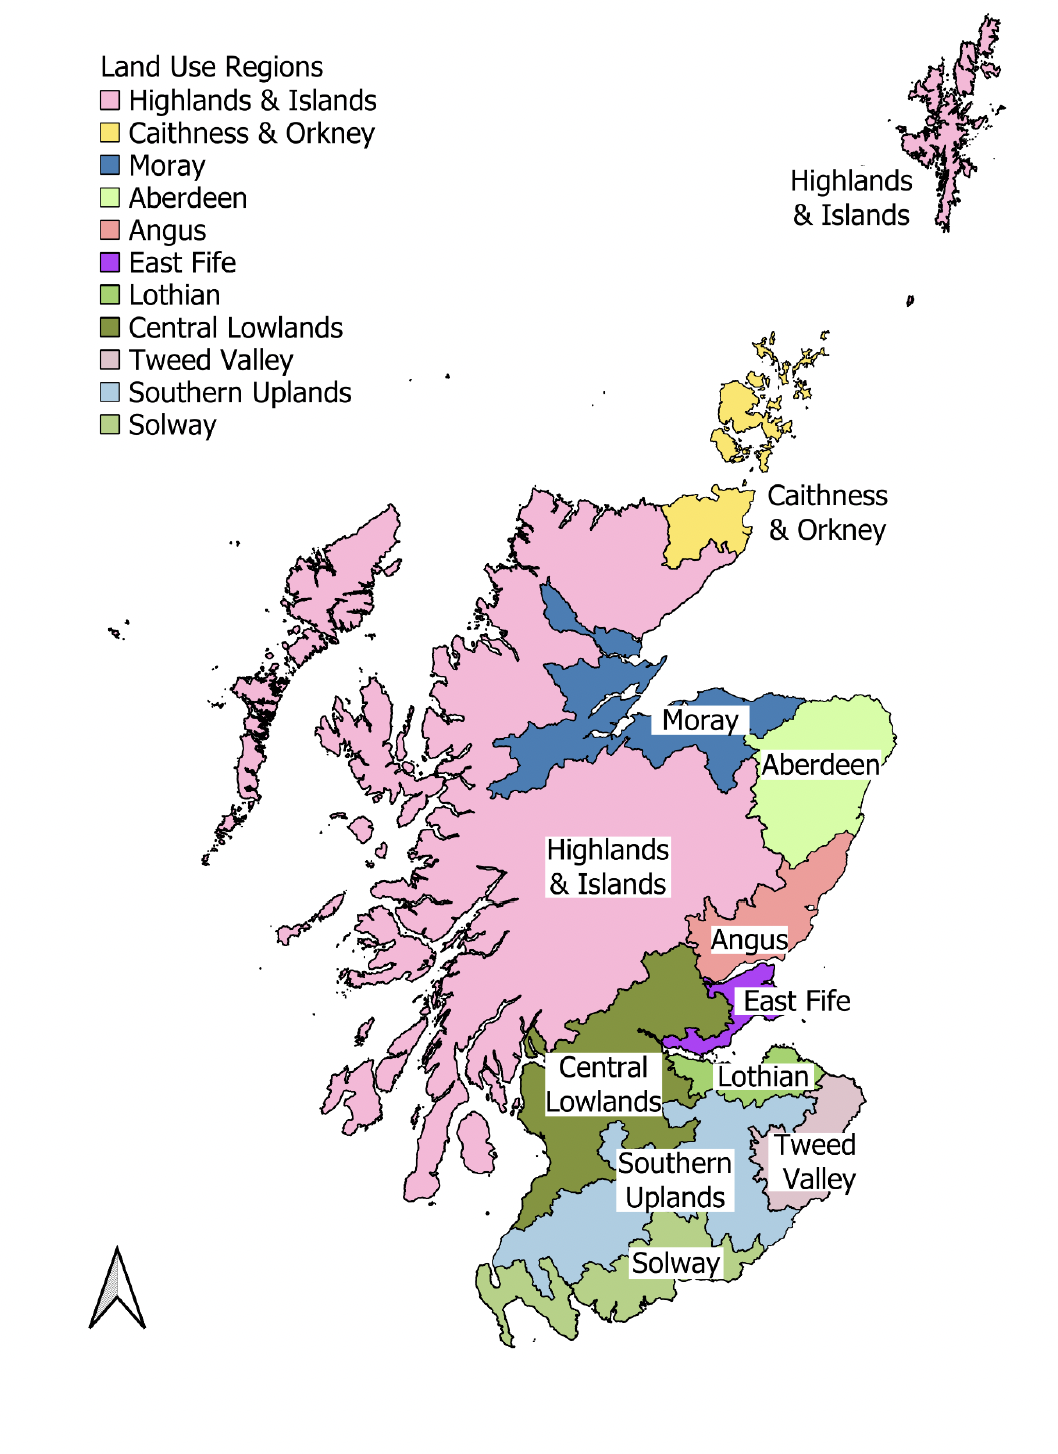 Map of Scotland showing locations of the eleven land use regions sampled: Highlands and Islands, Caithness and Orkney, Moray, Aberdeen, Angus, East Fife, Lothian, Central Lowlands, Tweed Valey, Southern Uplands and Solway.